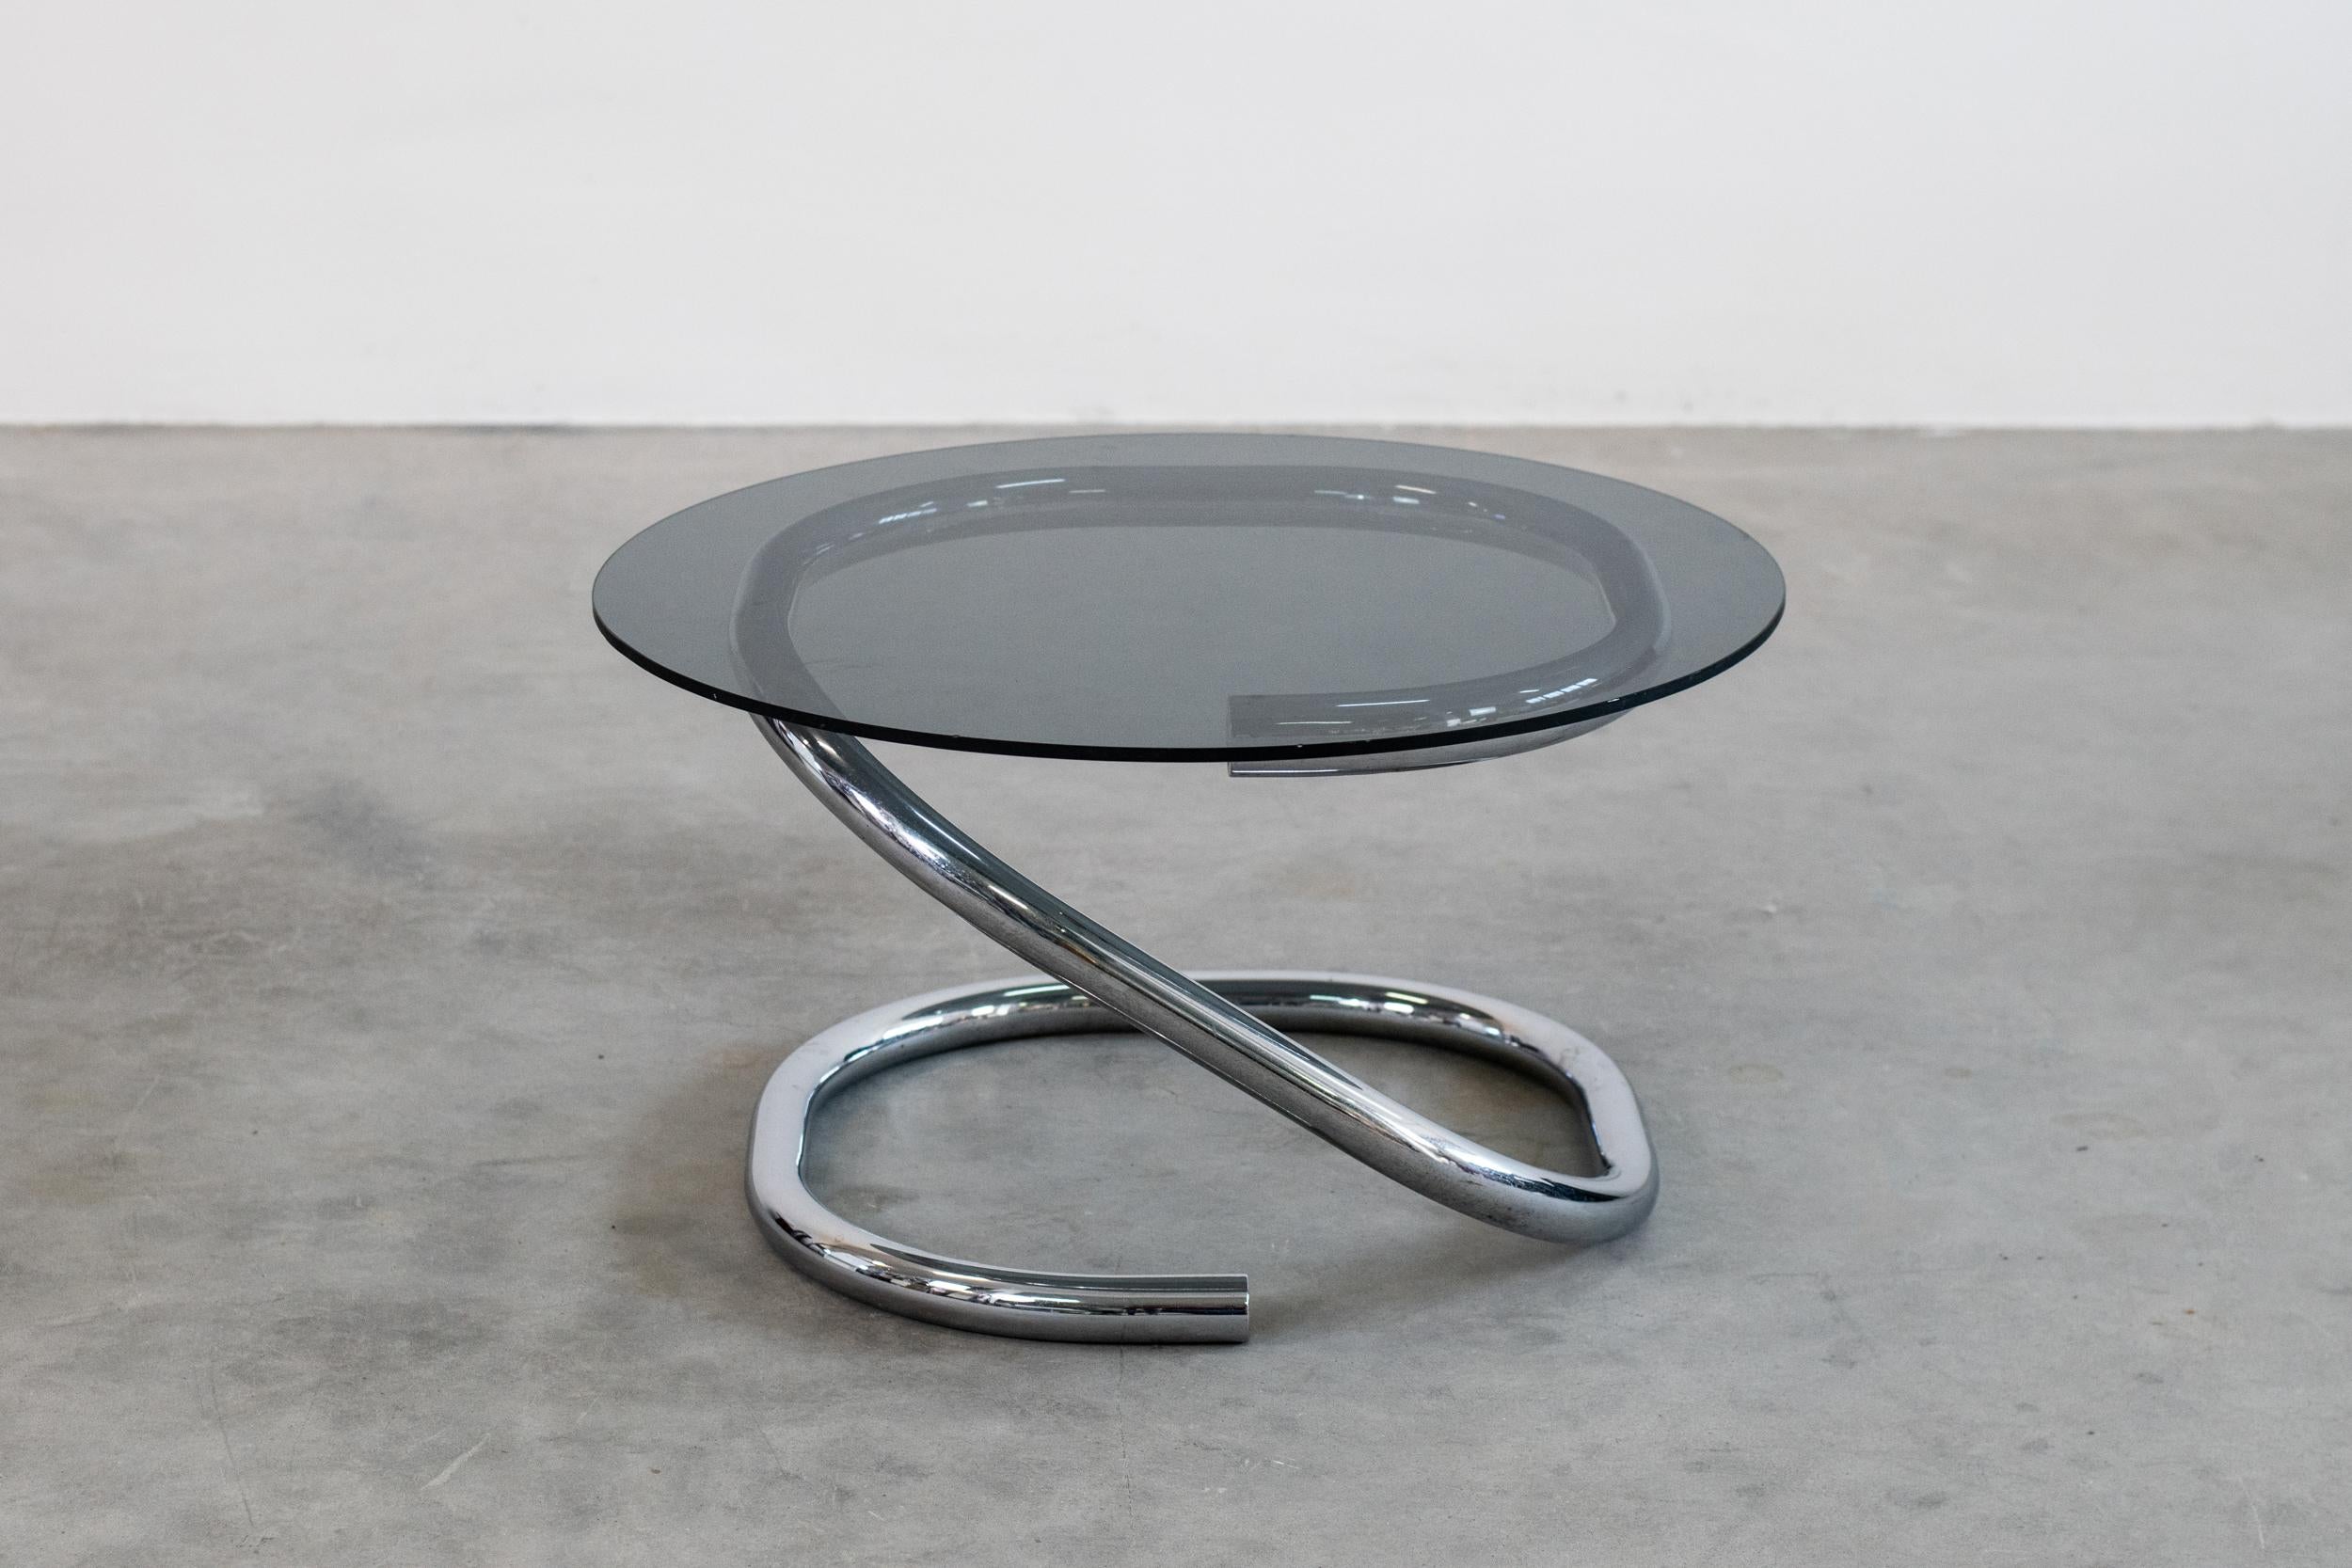 Very rare round-shape coffee table with a metal base and smoked glass on top, designed by Giotto Stoppino, Italian Manufacture 1970s.